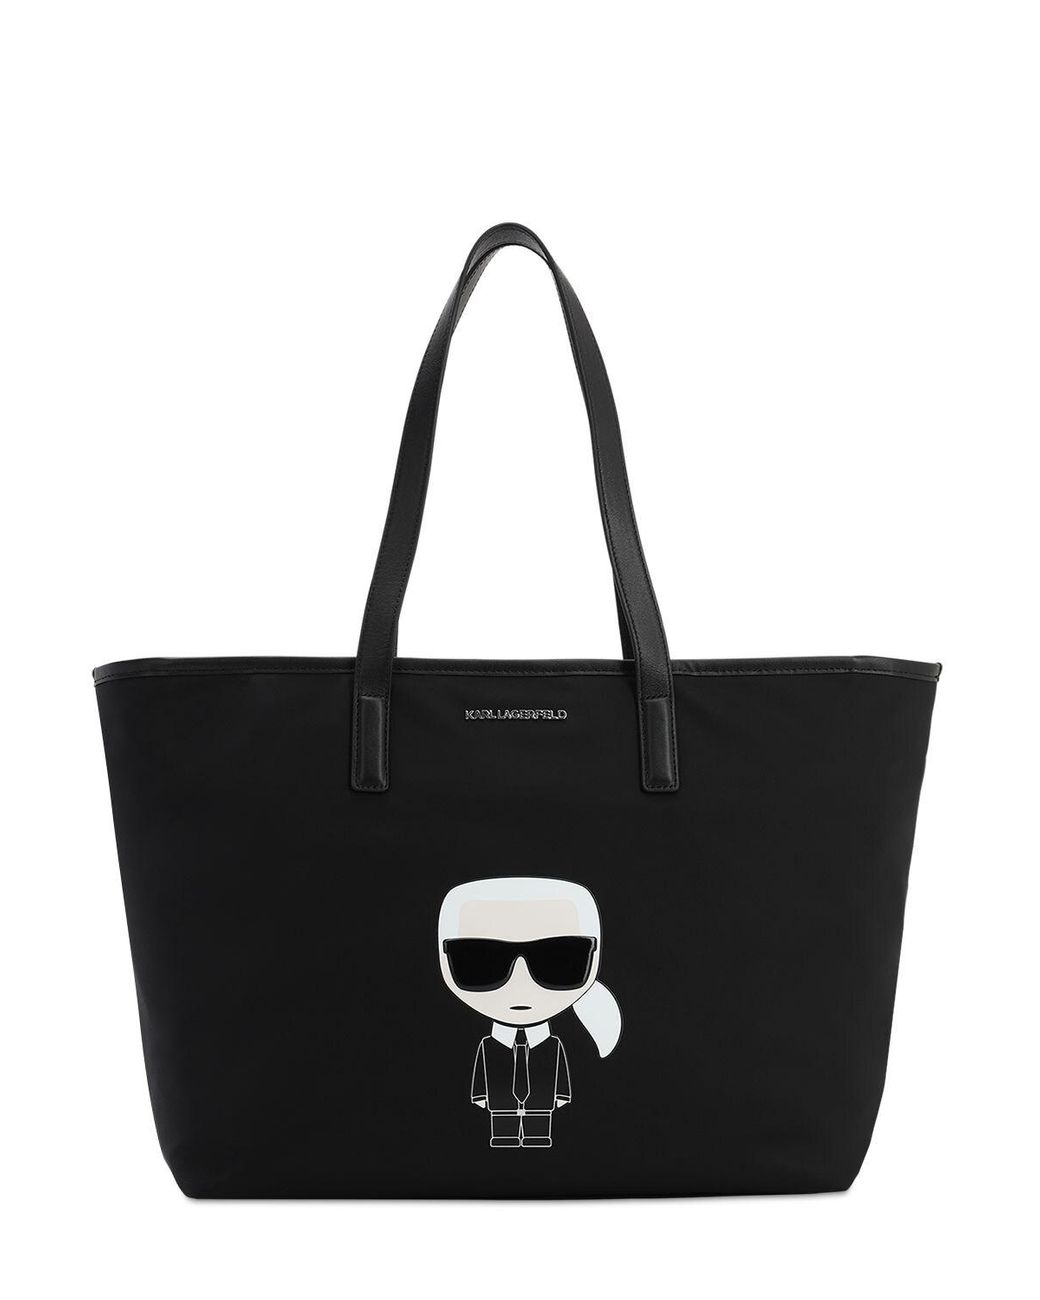 Karl Lagerfeld Synthetic K/ikonic Tote Bag in Black - Save 3% - Lyst